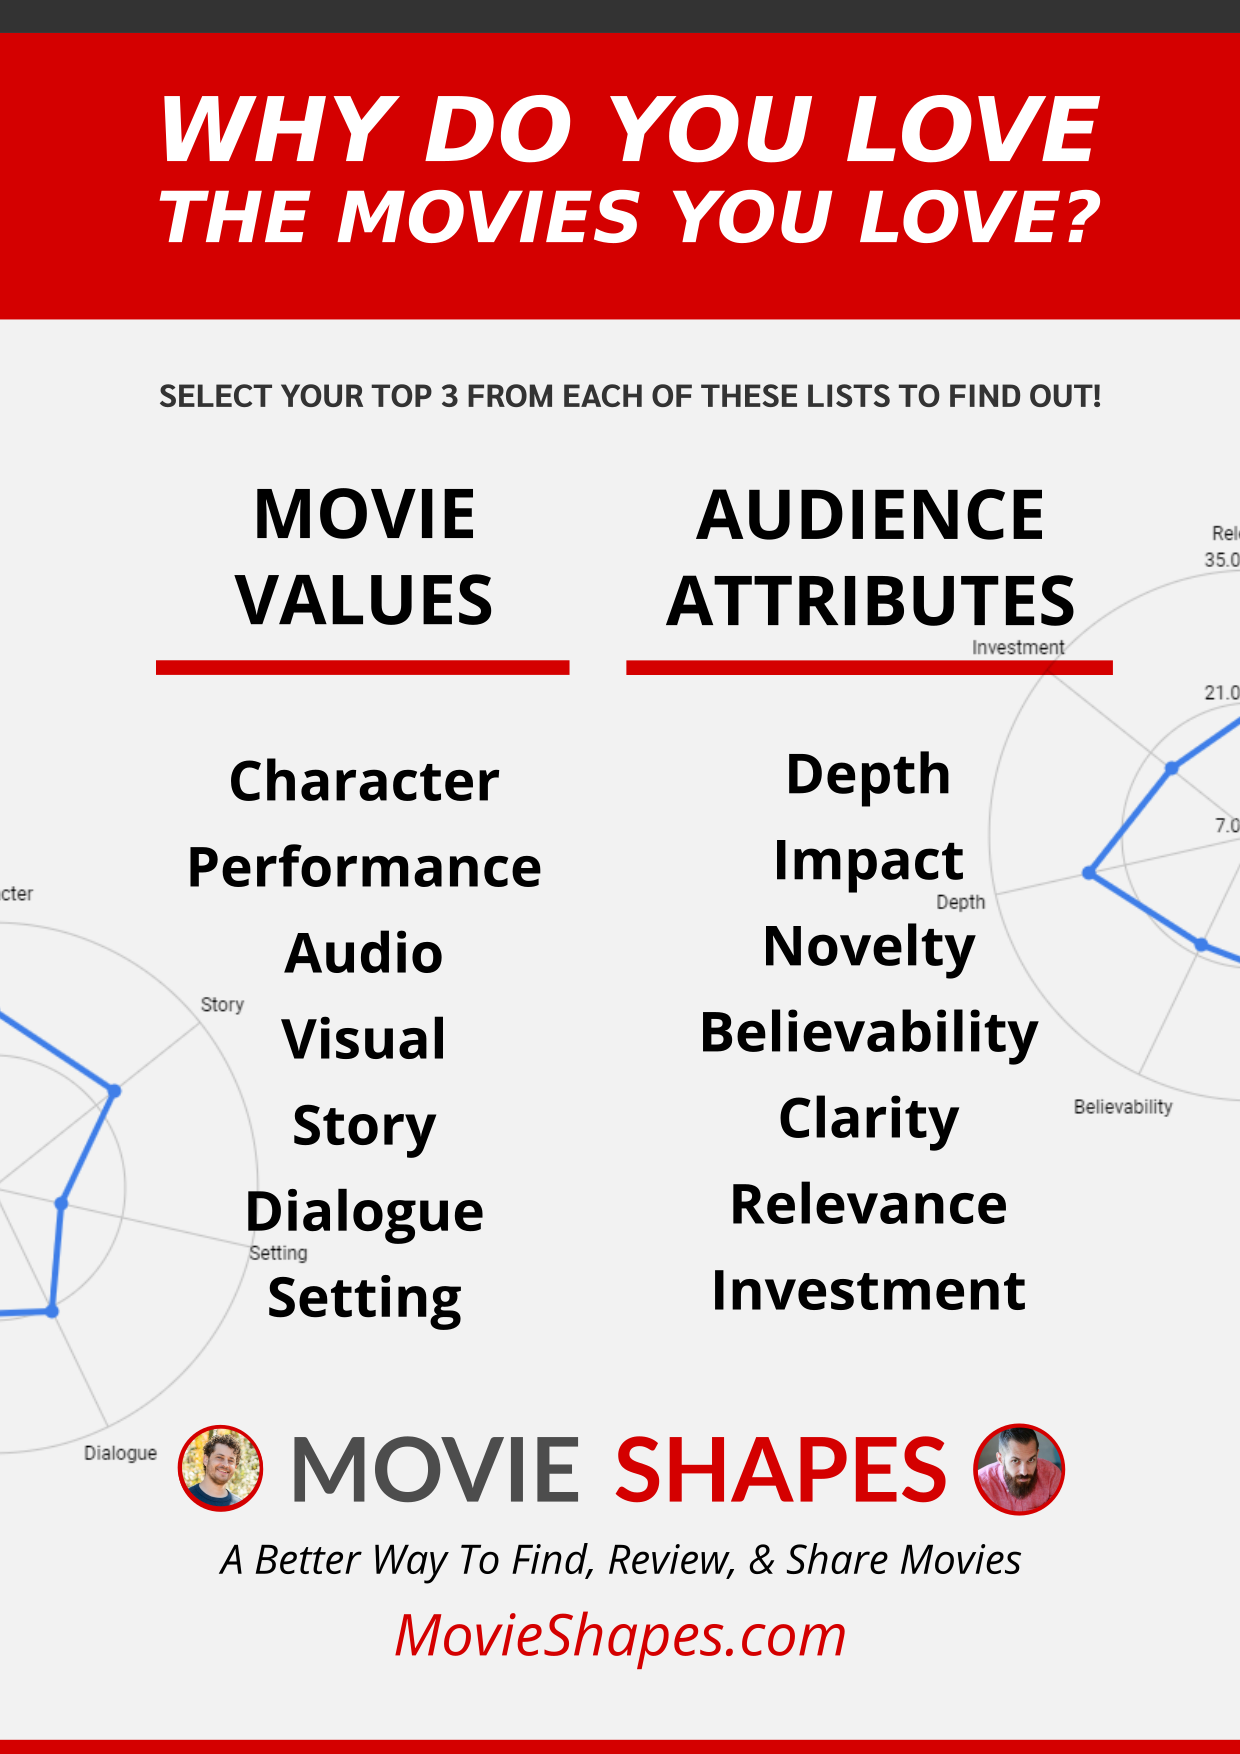 Movie Shapes Top 3 Promo Graphic - Audience Attributes - Movie Values